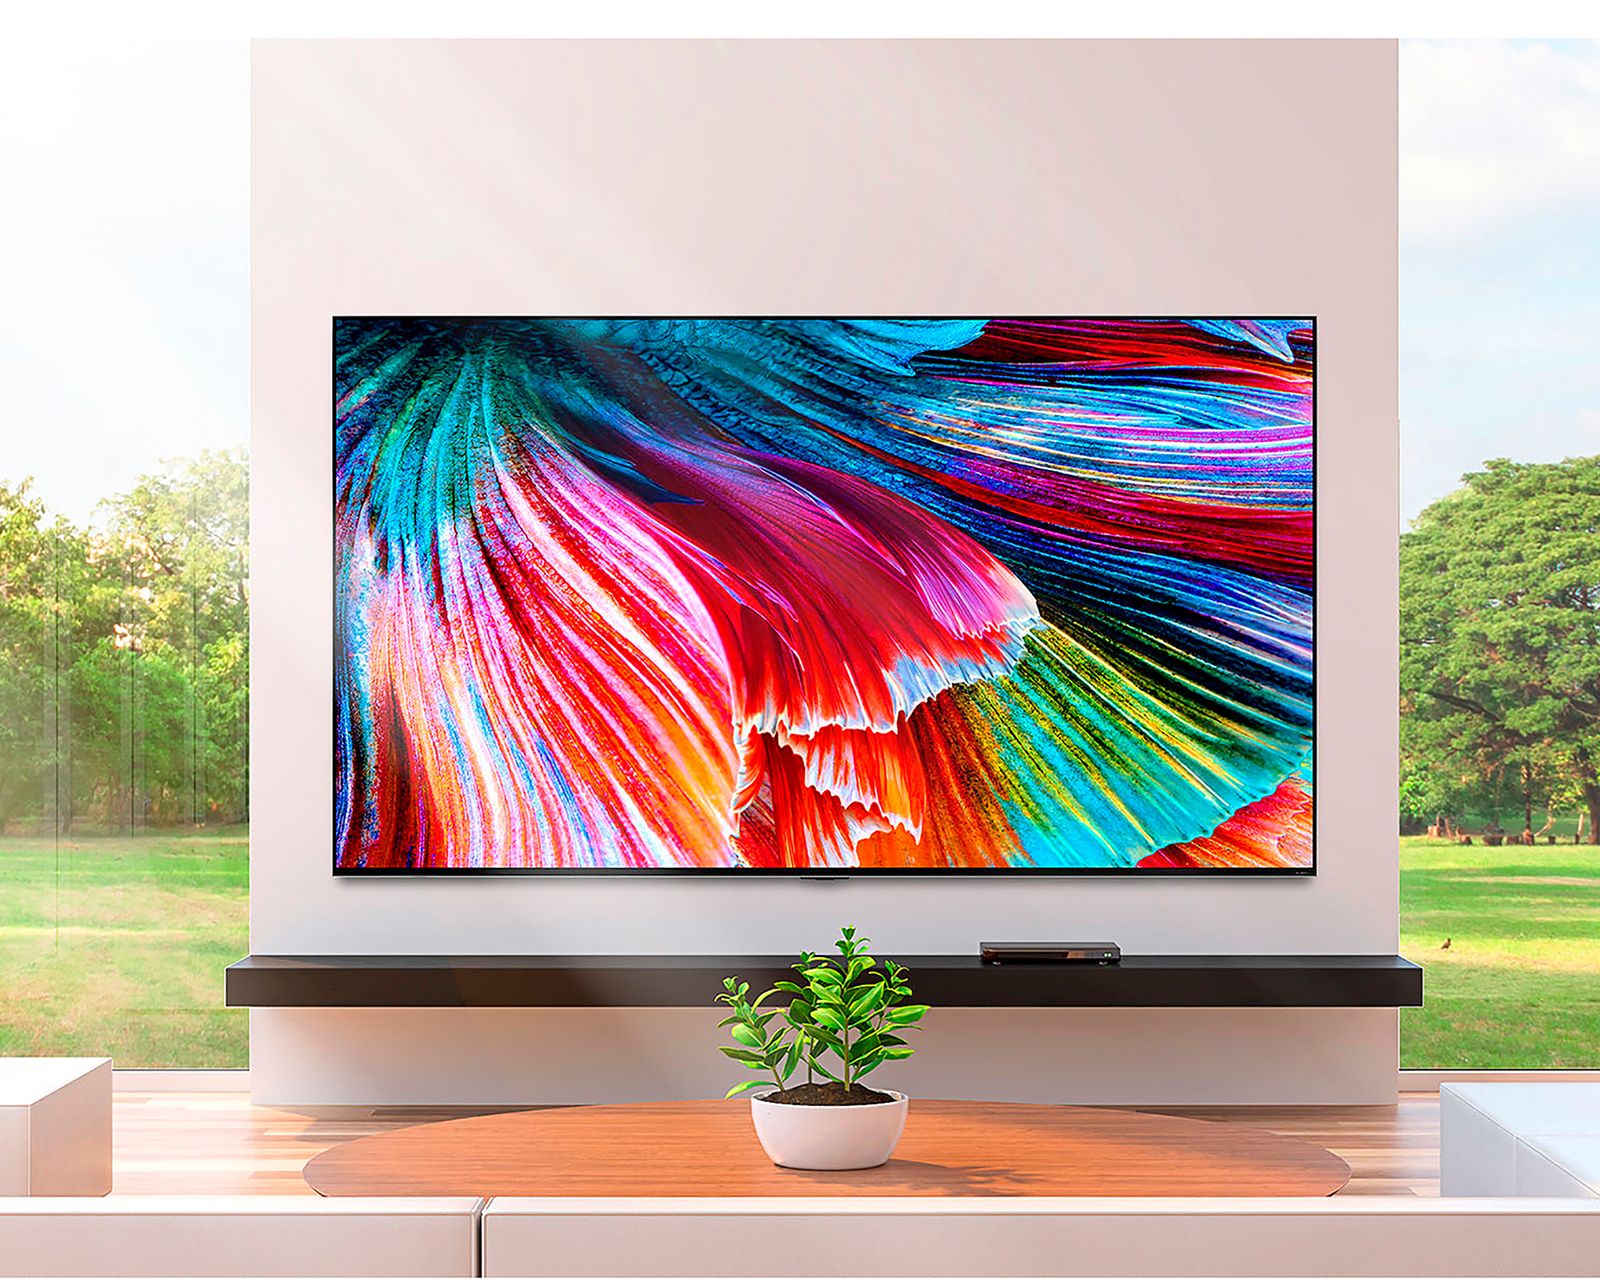 4K vs 8K TVs: what's the difference and should I care? | Livingetc